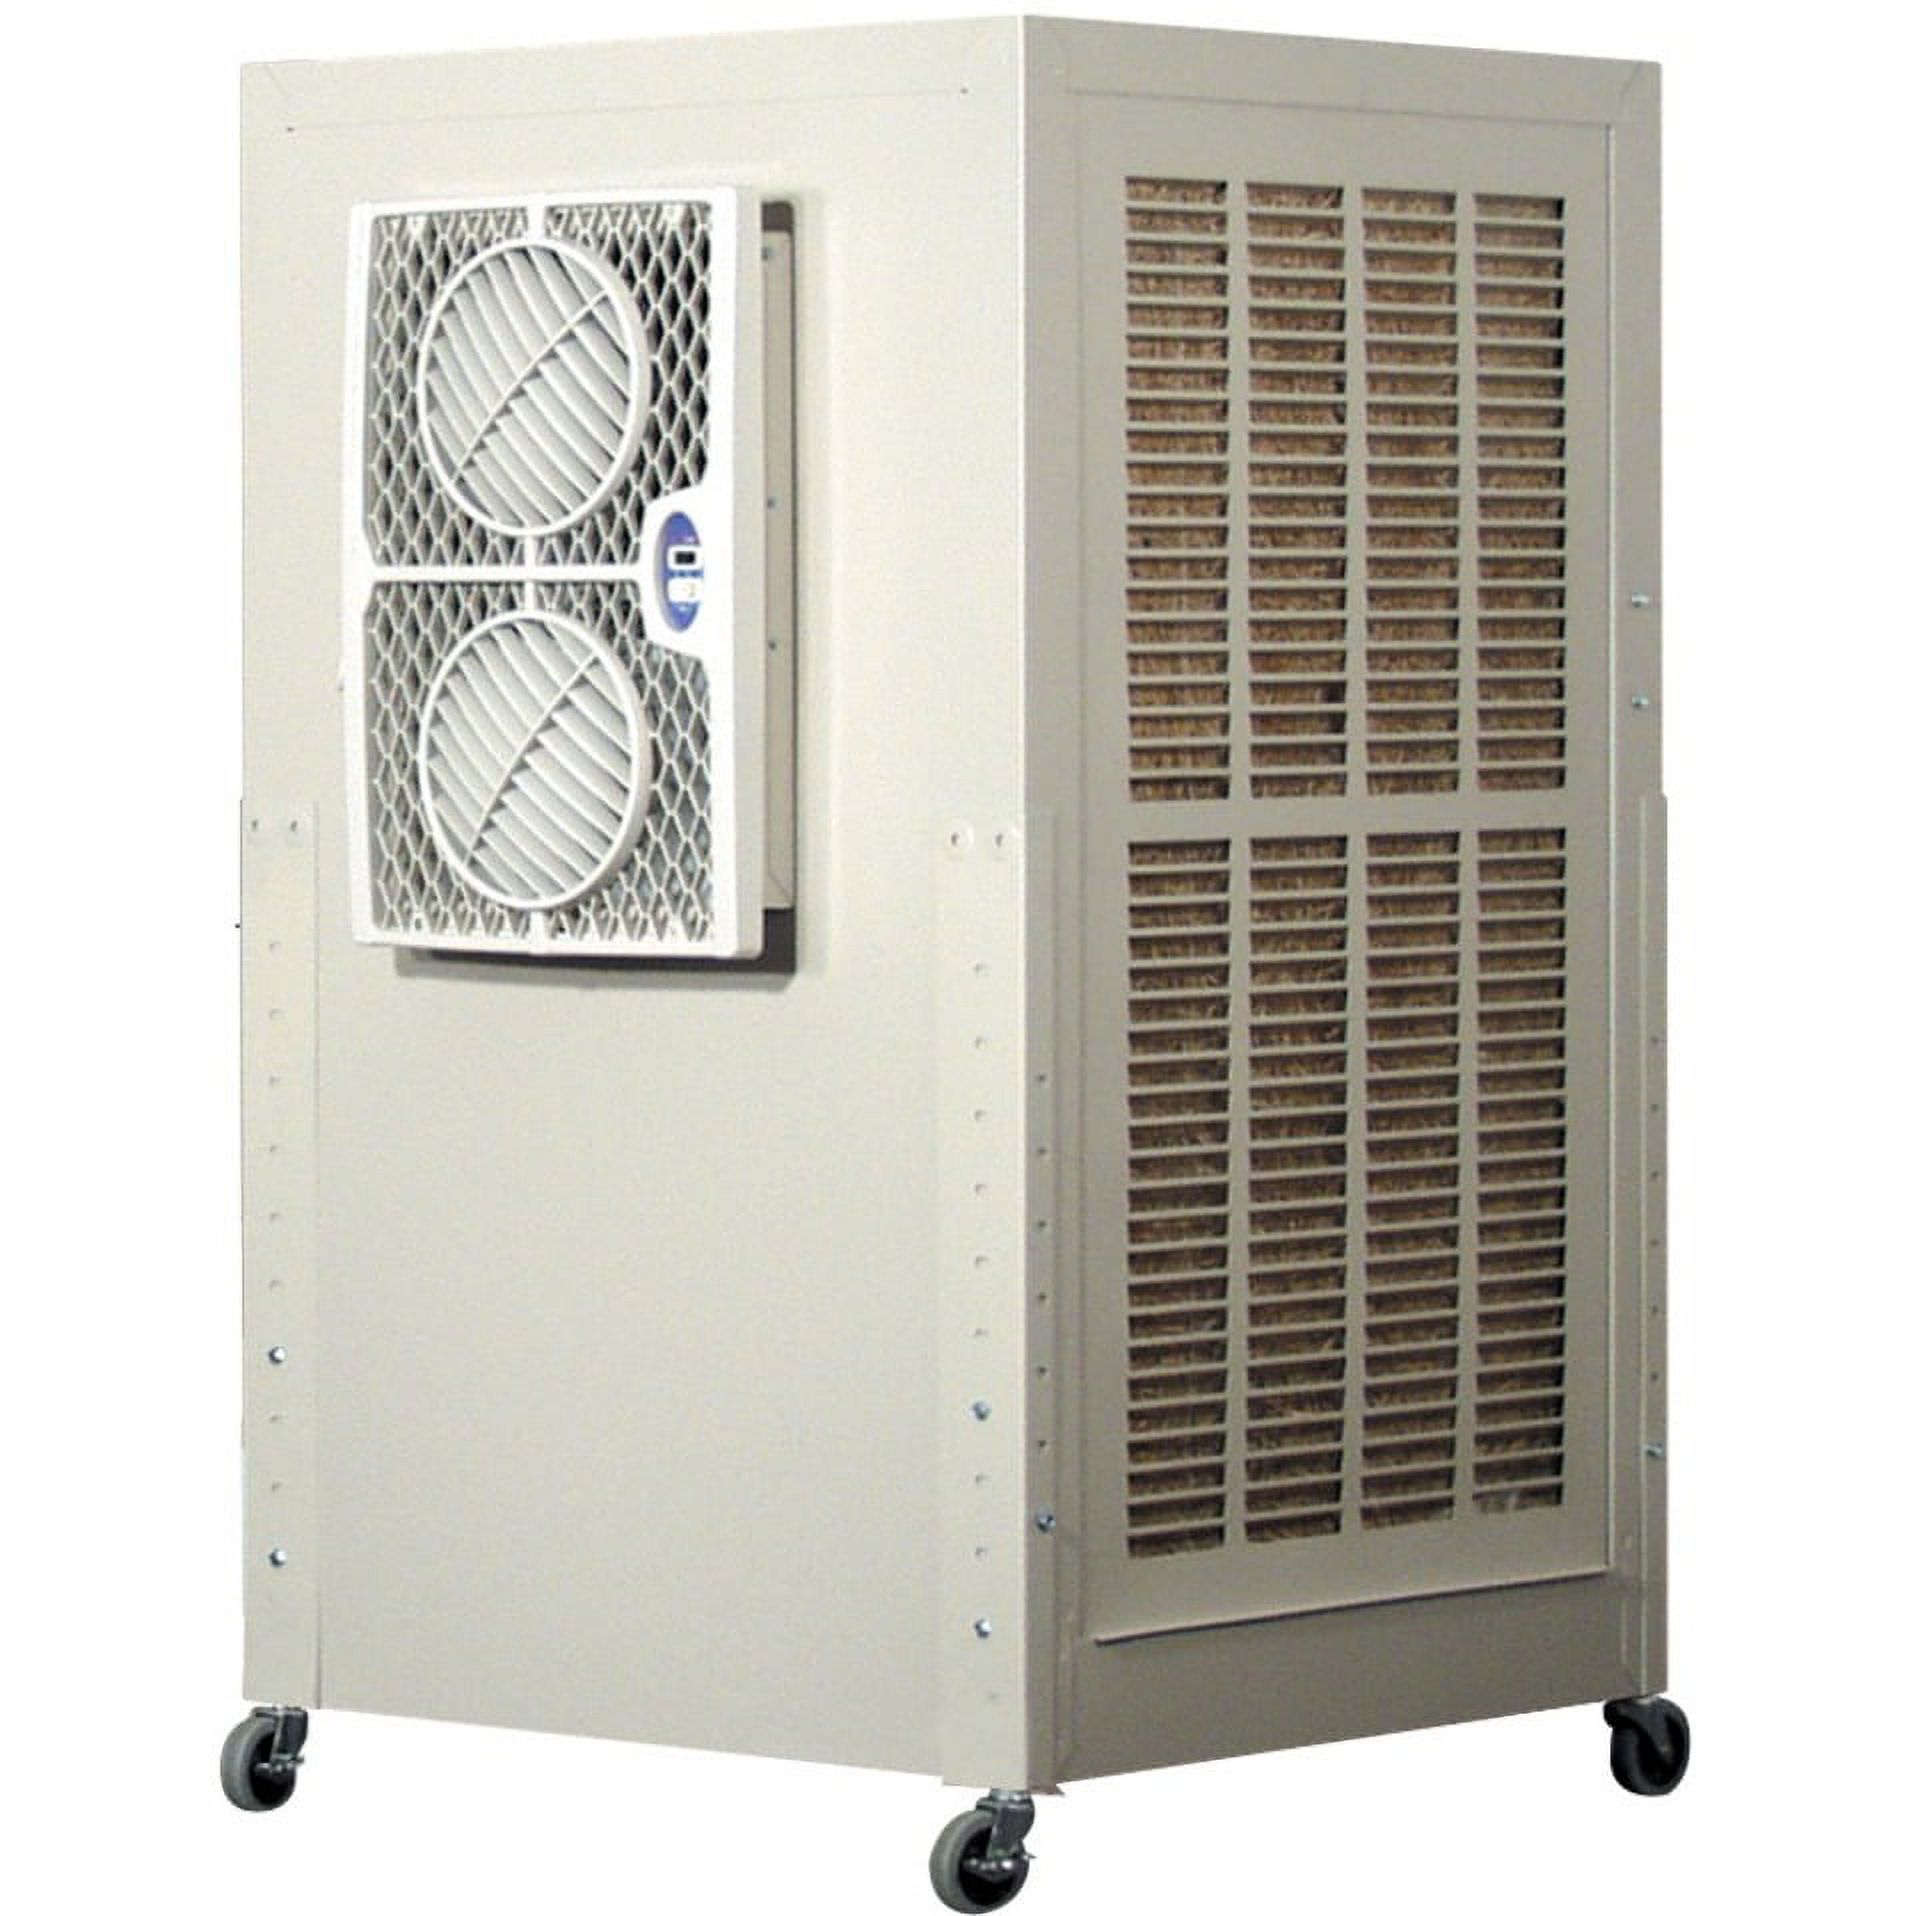 Evapcool CoolTool CTV21 Portable Air Cooler - image 1 of 2